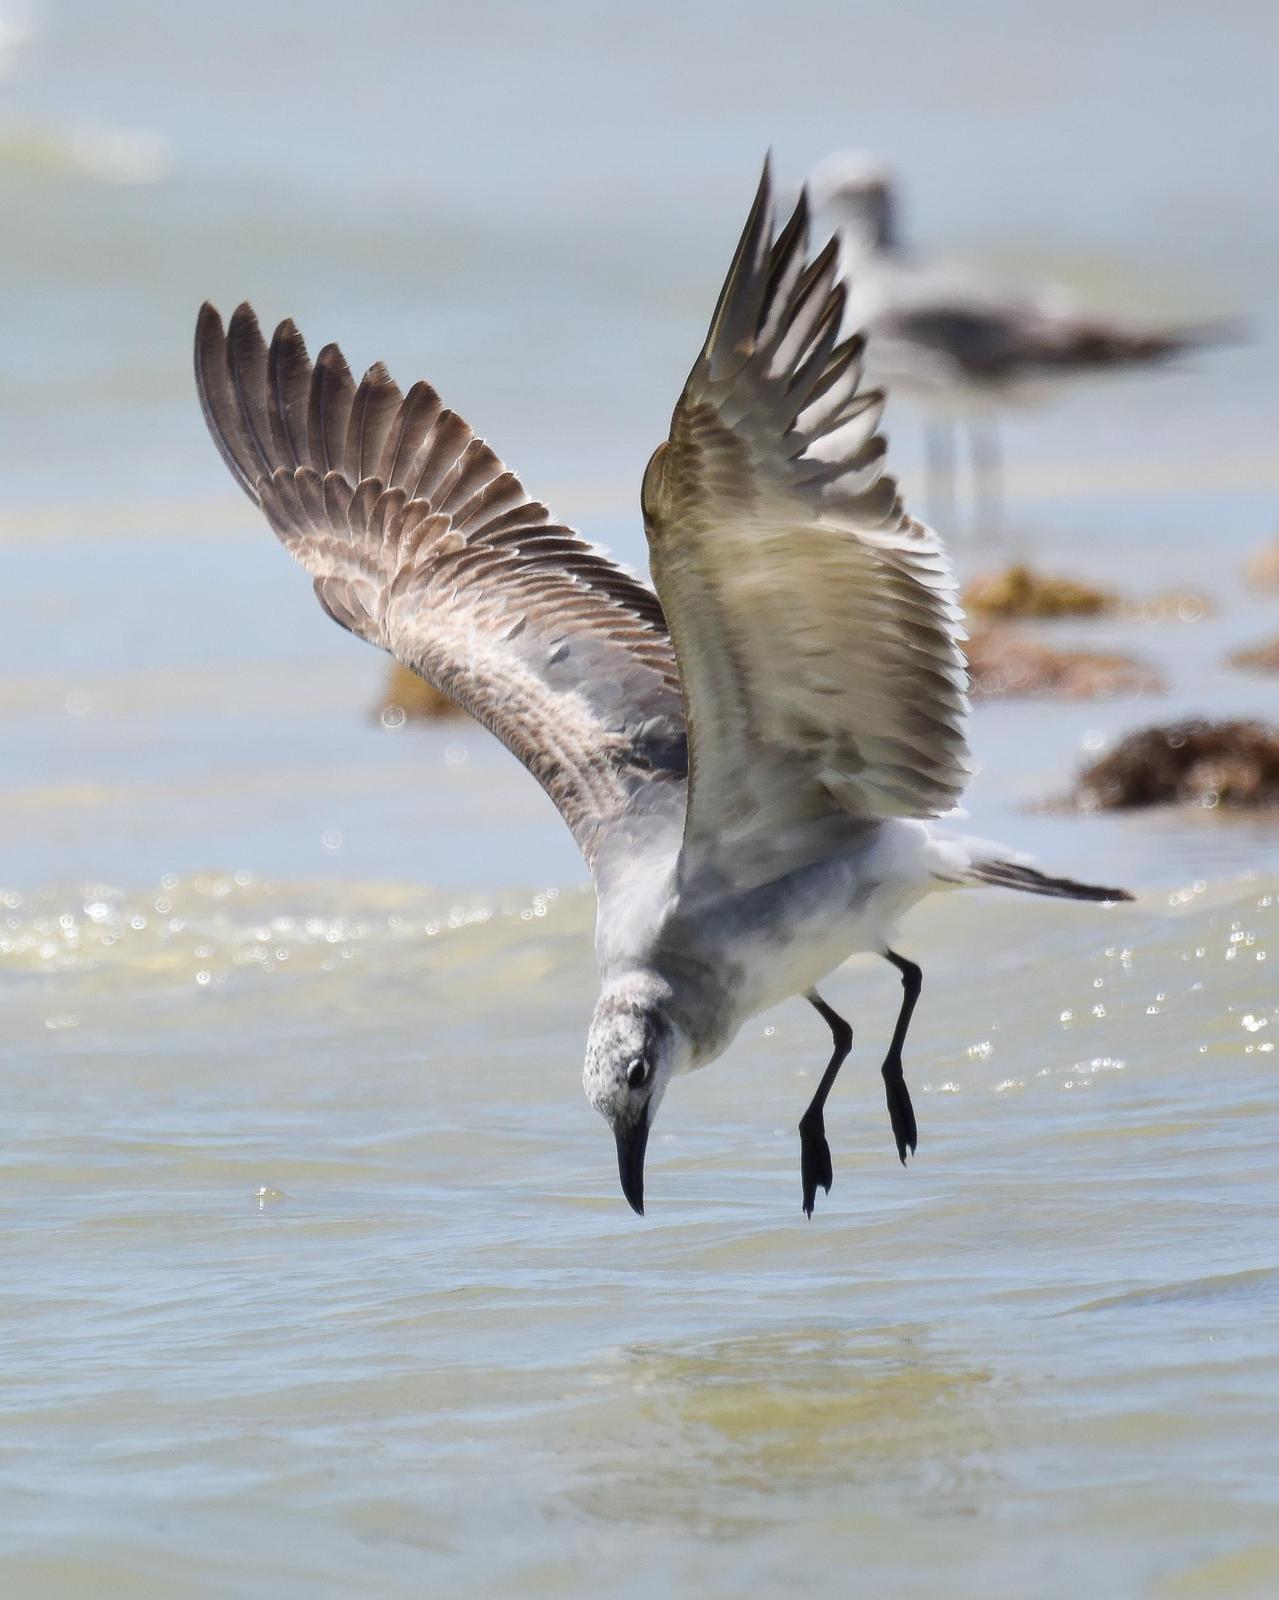 Laughing Gull Photo by Steve Percival